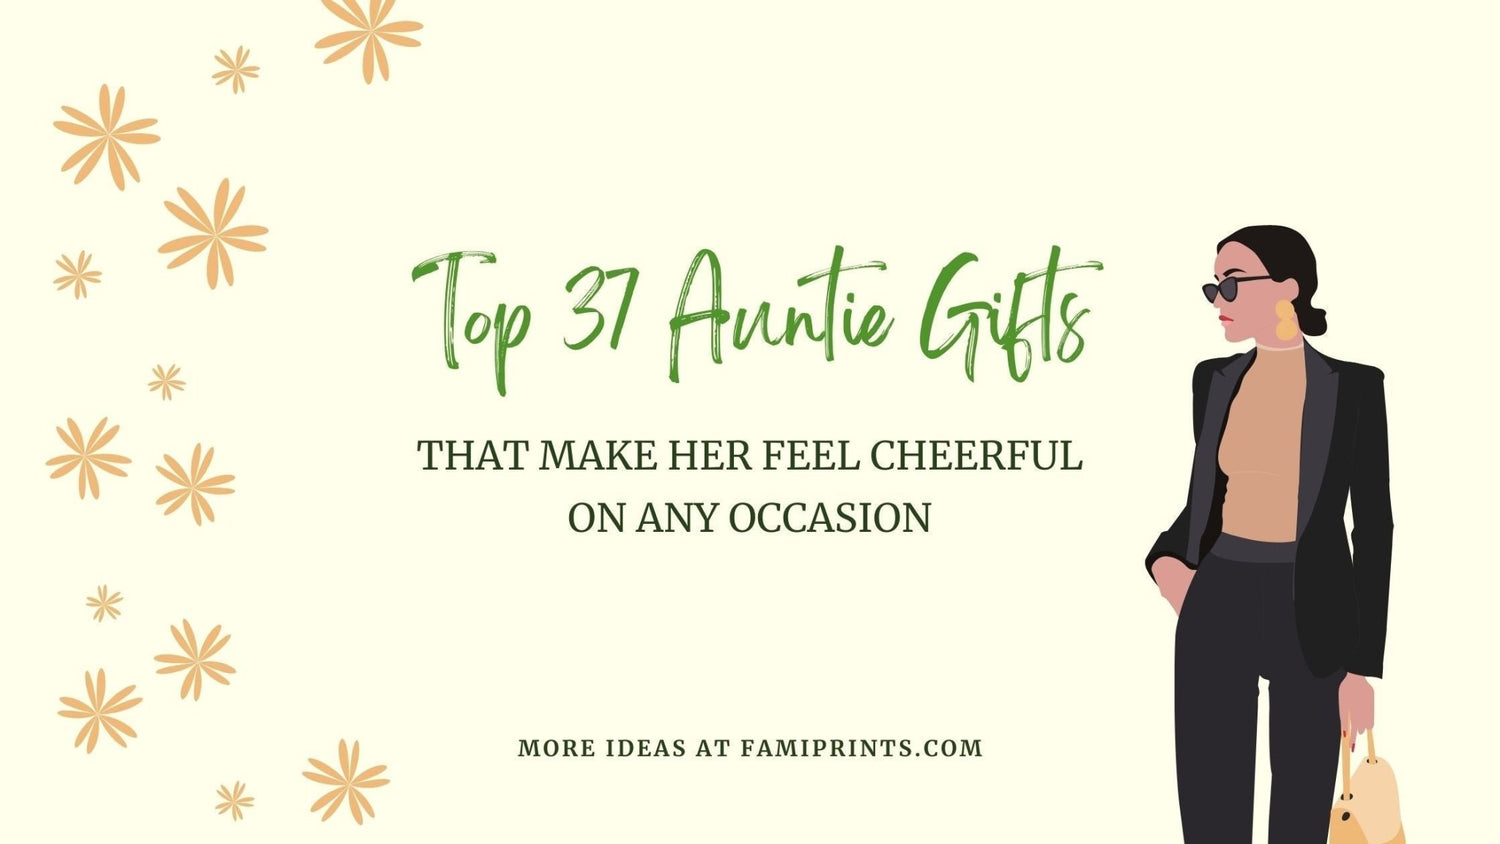 Top 37 Auntie Gifts That Make Her Feel Cheerful On Any Occasion - FamiPrints | Trending Customizable Family Gifts